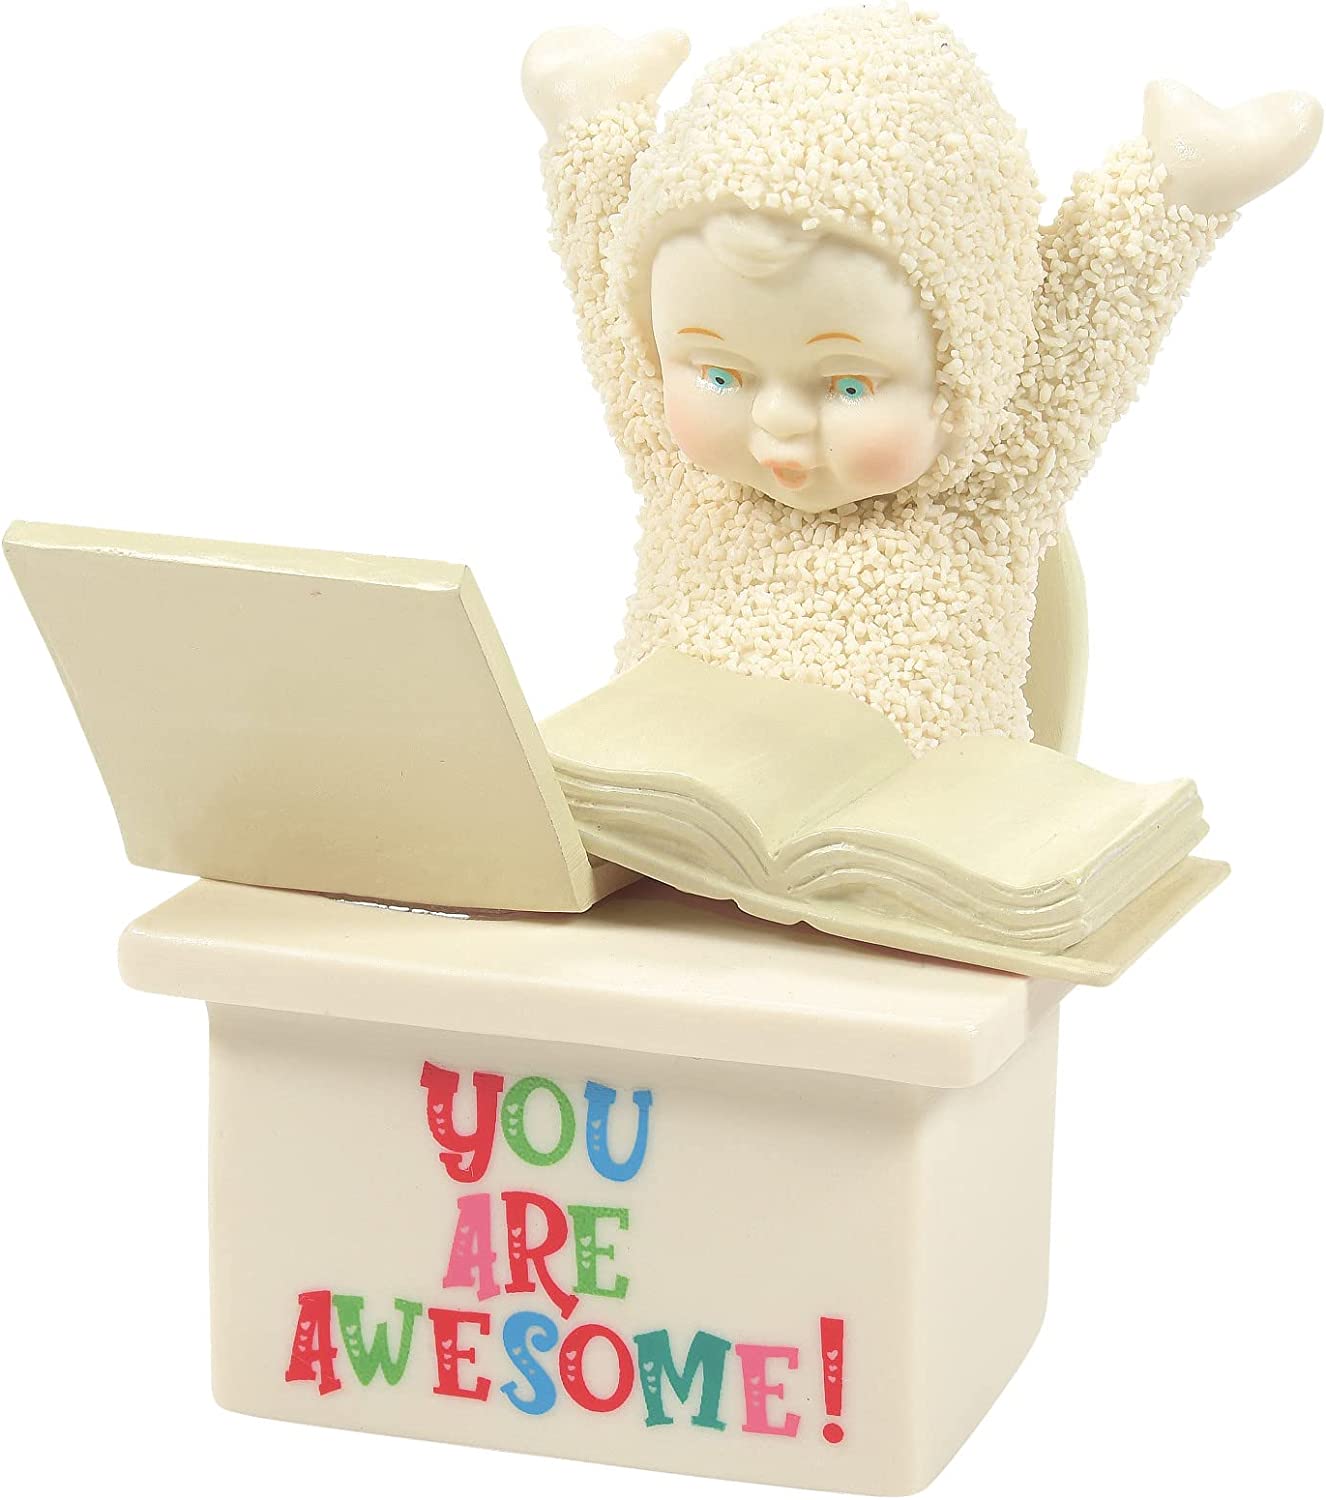 Department 56 Snowbabies You are Awesome Figurine